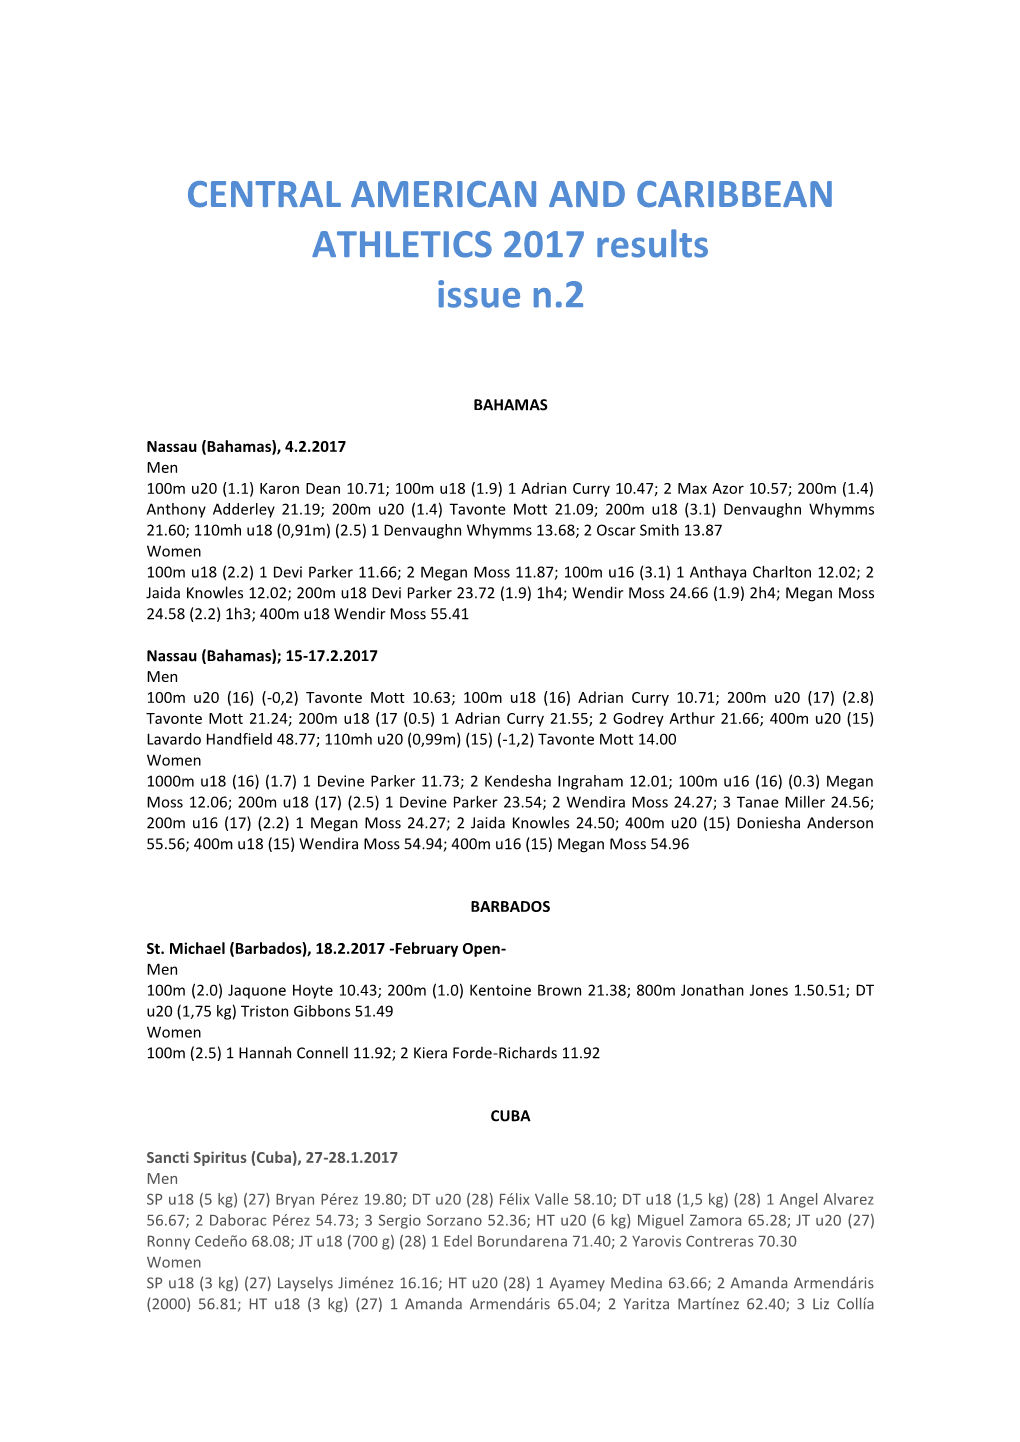 CENTRAL AMERICAN and CARIBBEAN ATHLETICS 2017 Results Issue N.2